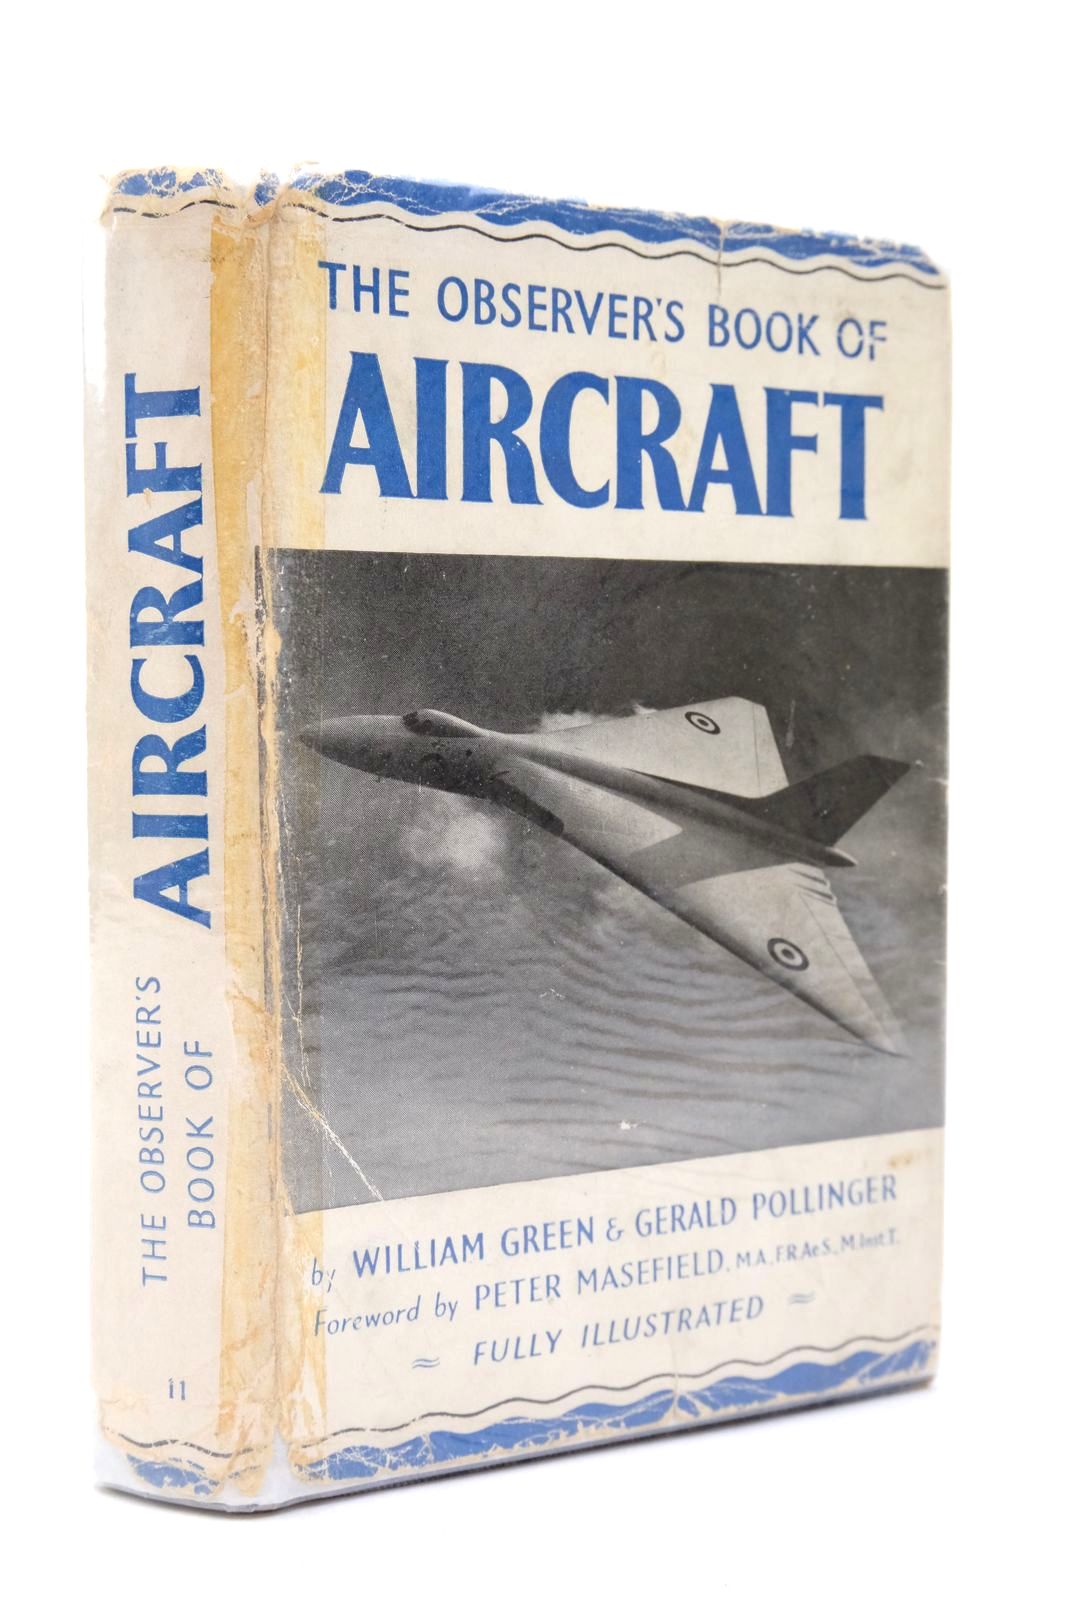 Photo of THE OBSERVER'S BOOK OF AIRCRAFT written by Green, William
Pollinger, Gerald published by Frederick Warne & Co Ltd. (STOCK CODE: 2140243)  for sale by Stella & Rose's Books